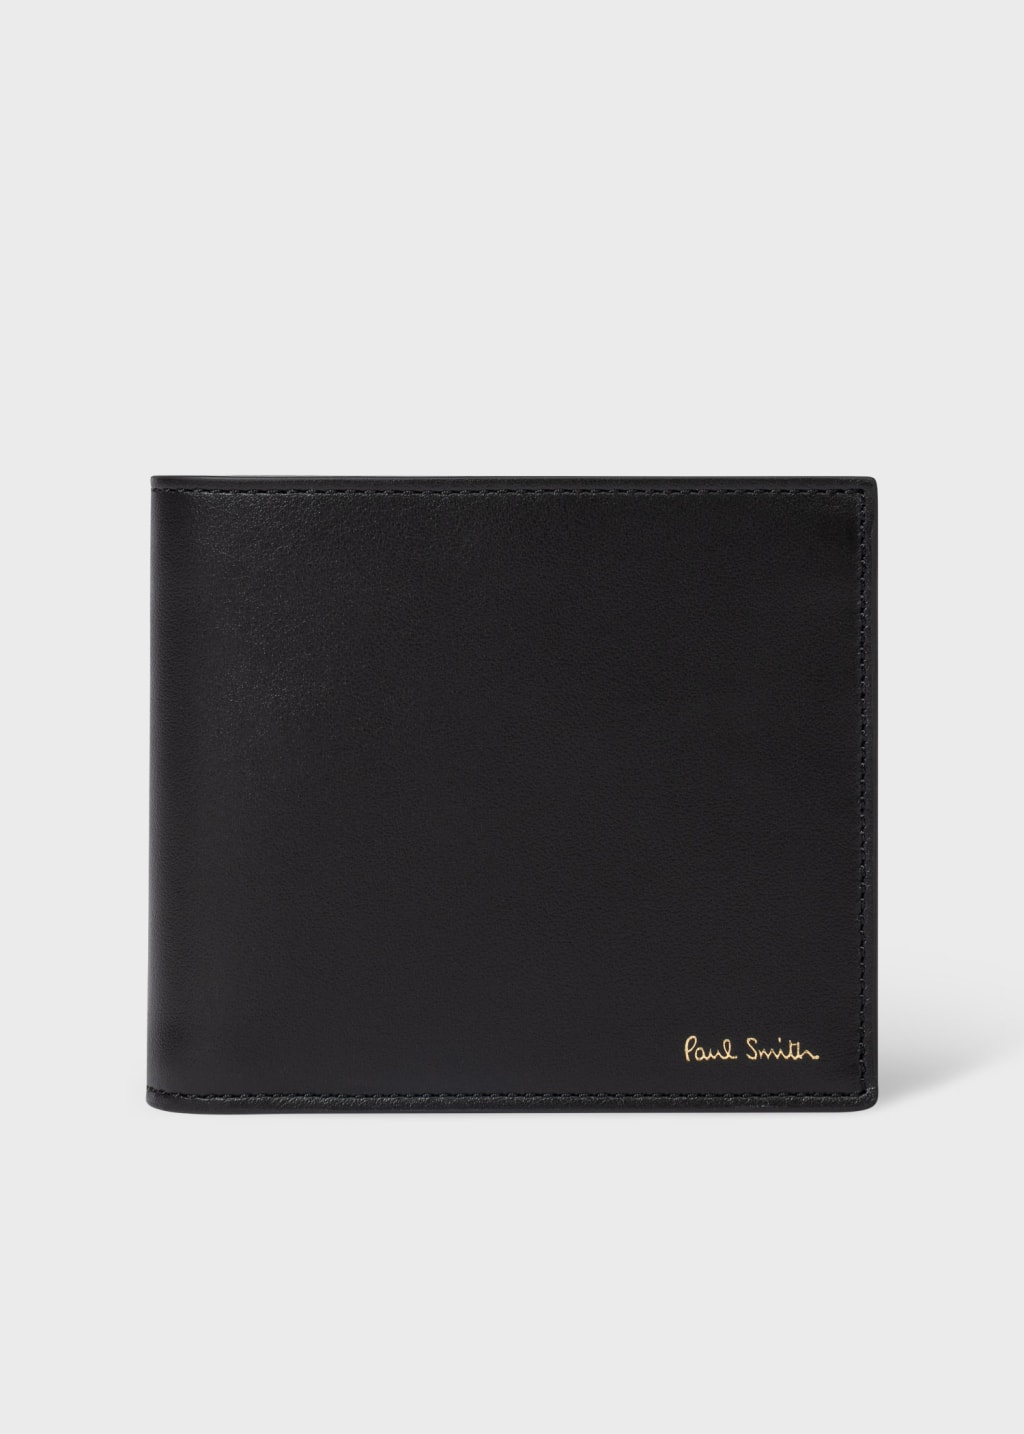 Product View - Black Leather 'Year Of The Dragon' Billfold Wallet by Paul Smith